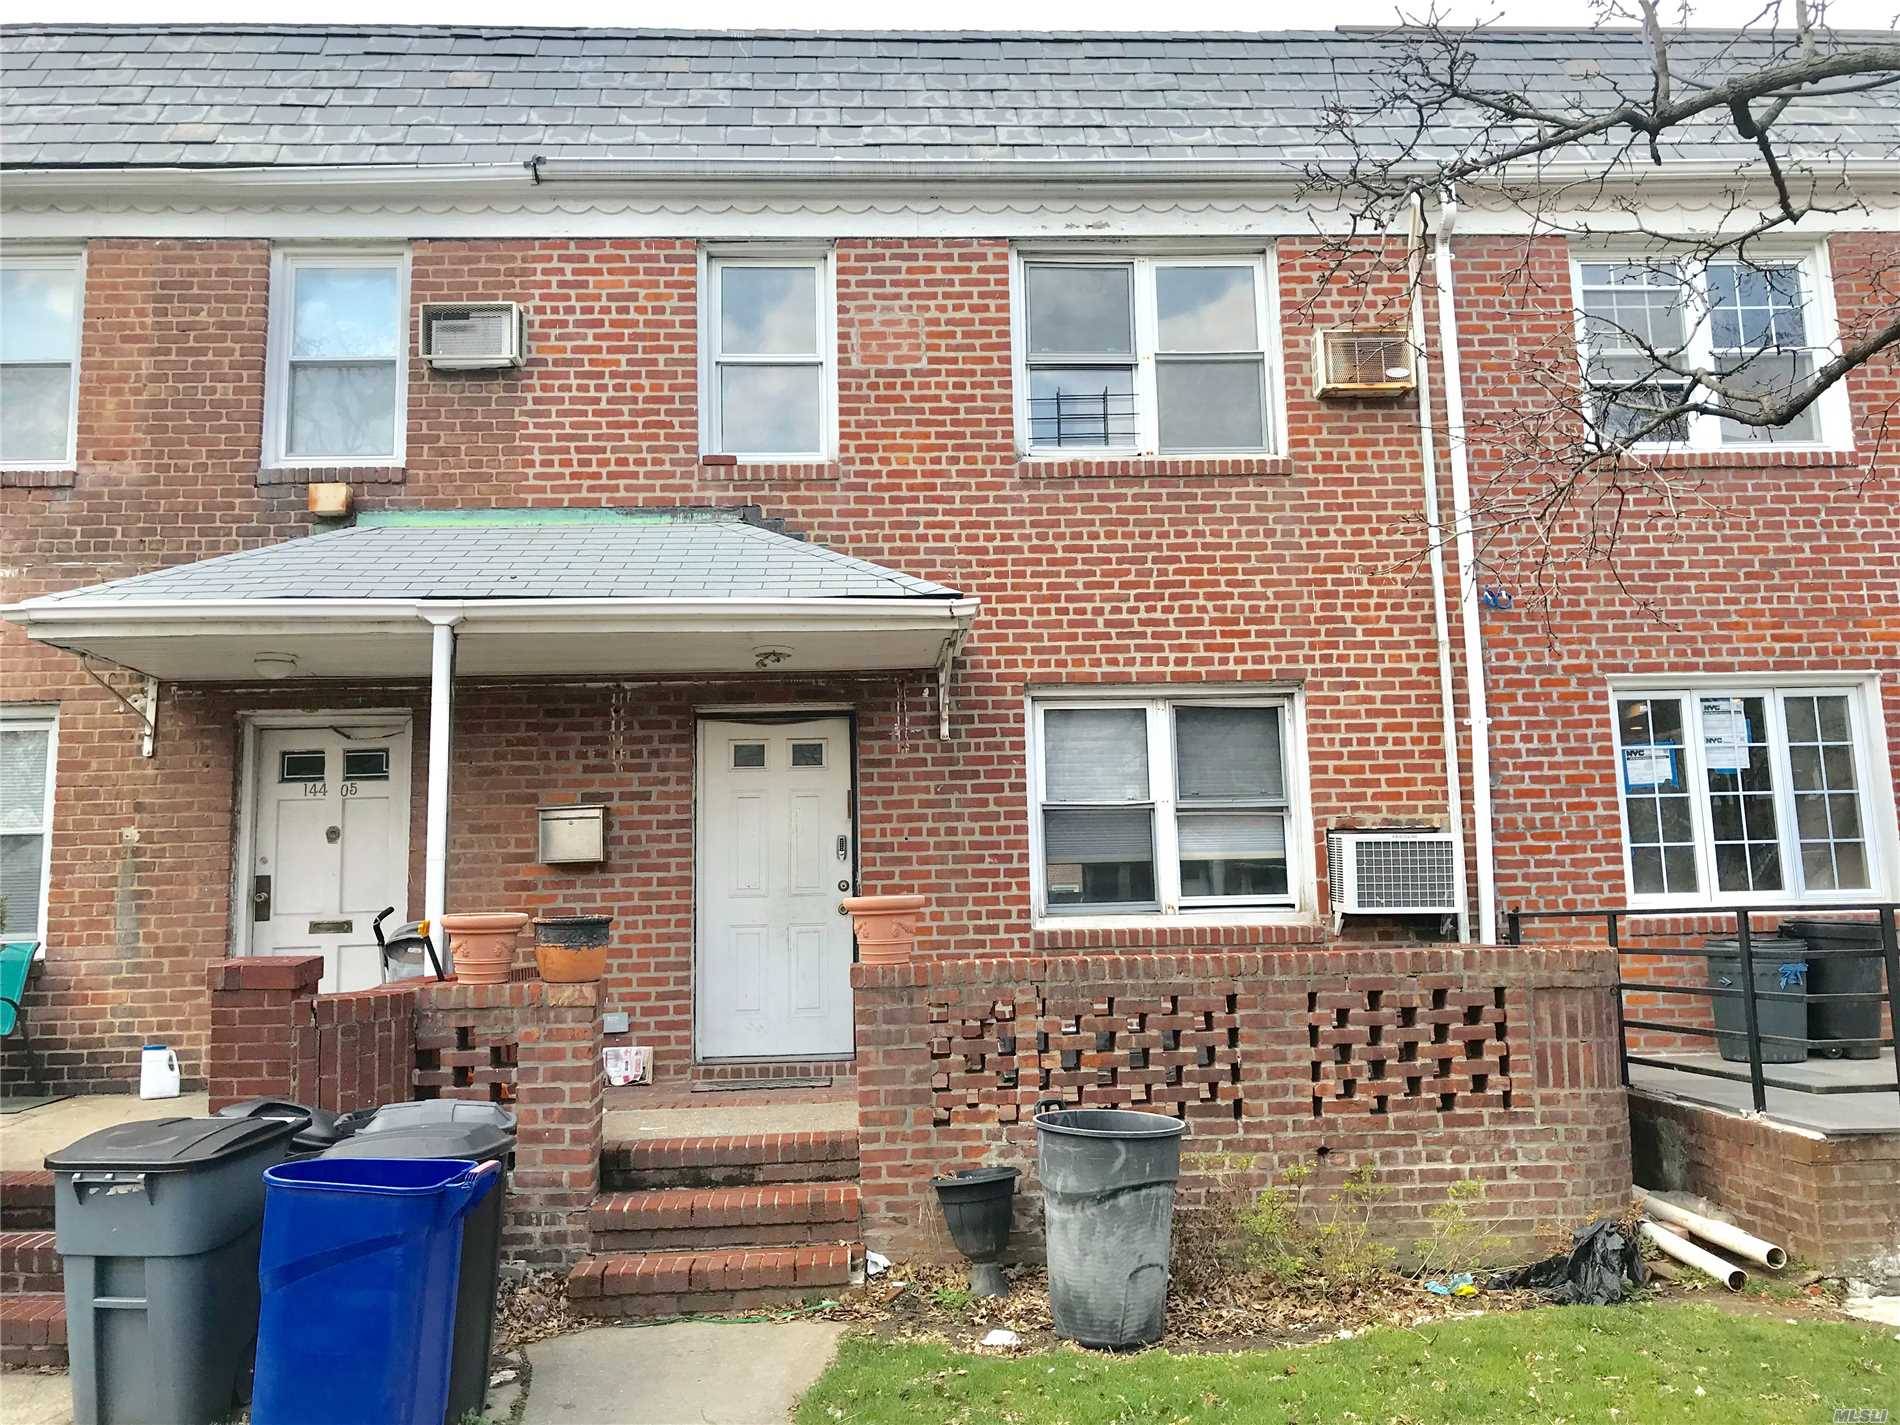 Rarely opportunity to own a beautifully renovated colonial in the heart of kew garden hills, close to shops, restaurants, massive transportation, Queens college and major highway.